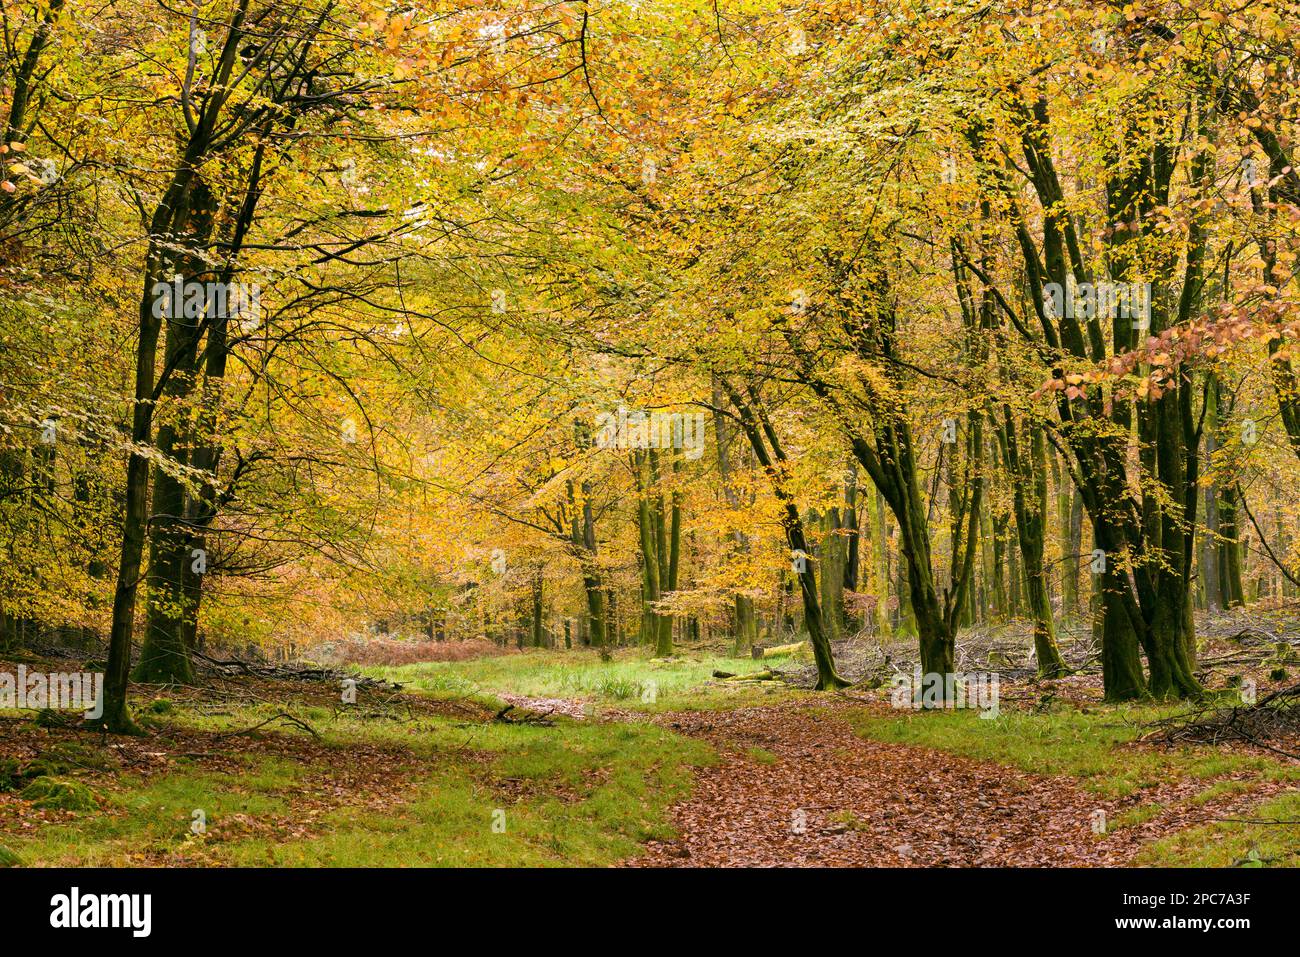 Autumn colour in a beech woodland at Rowberrow Warren in the Mendip Hills, Somerset, England. Stock Photo